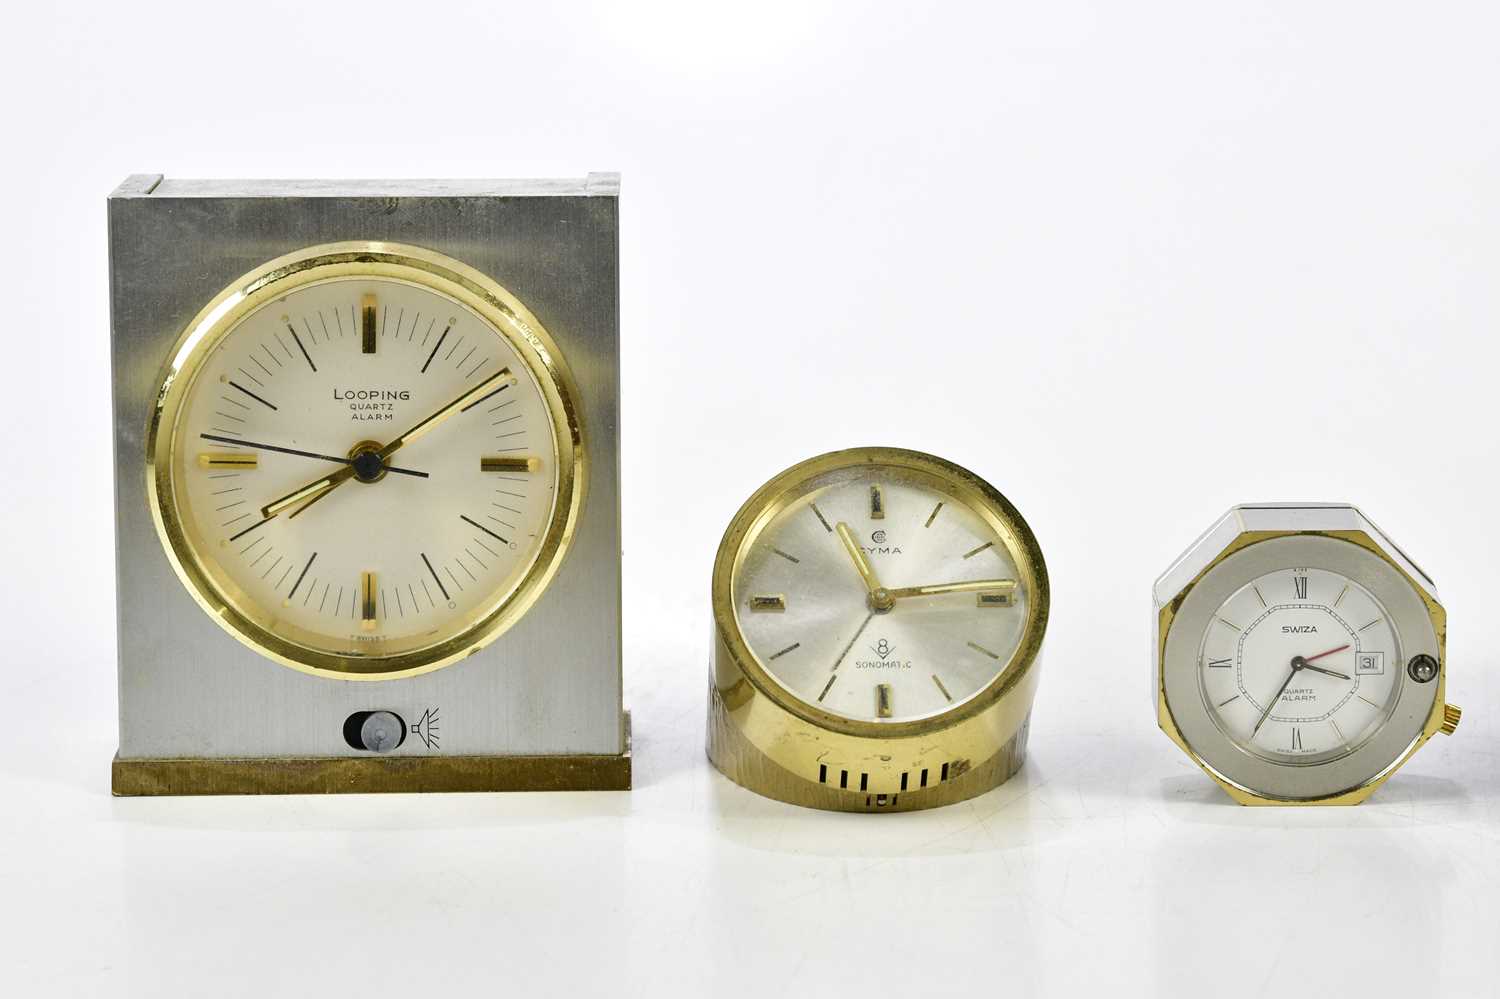 LOOPING; a stainless steel cased quartz alarm clock, a Cyma eight day Sonomatic desk clock, a - Image 2 of 3